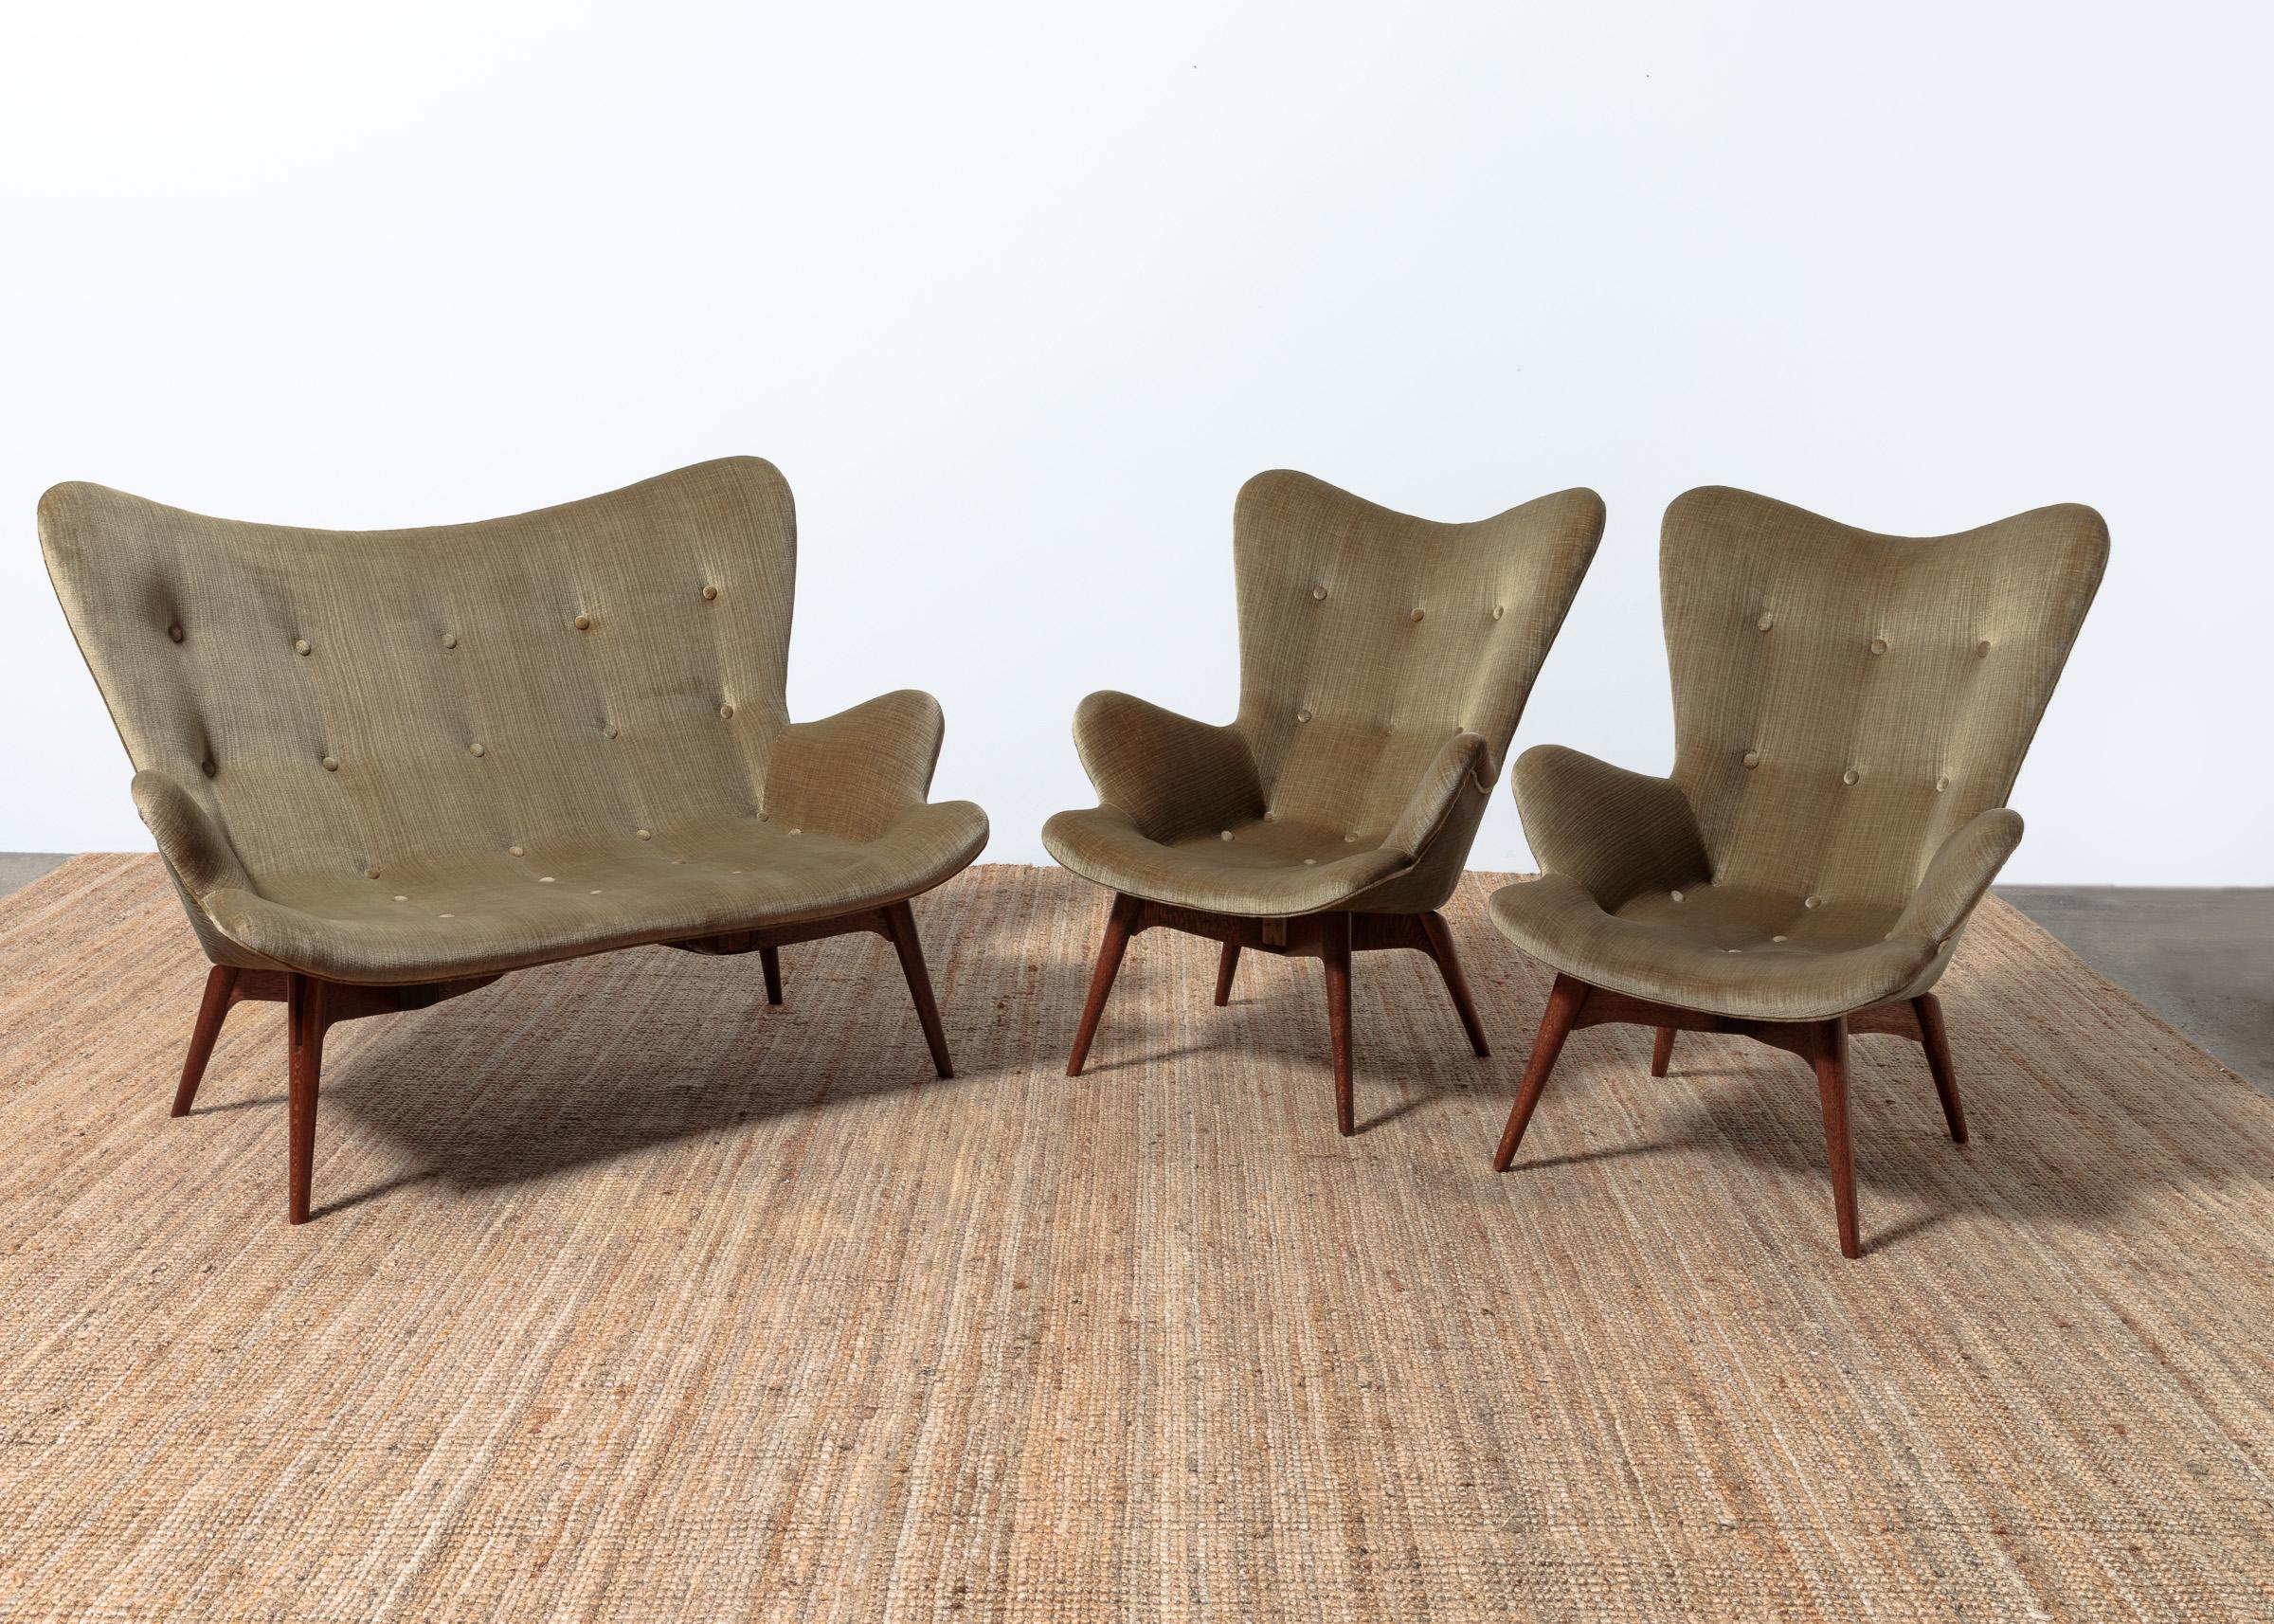 Product ID:
474
 
Product Description Title:
Original Genuine restored Featherston contour suite pair armchairs R160 matching R161 settee (pair of armchairs + settee) 

Full Description:
A highly collectable original authentic Featherston contour